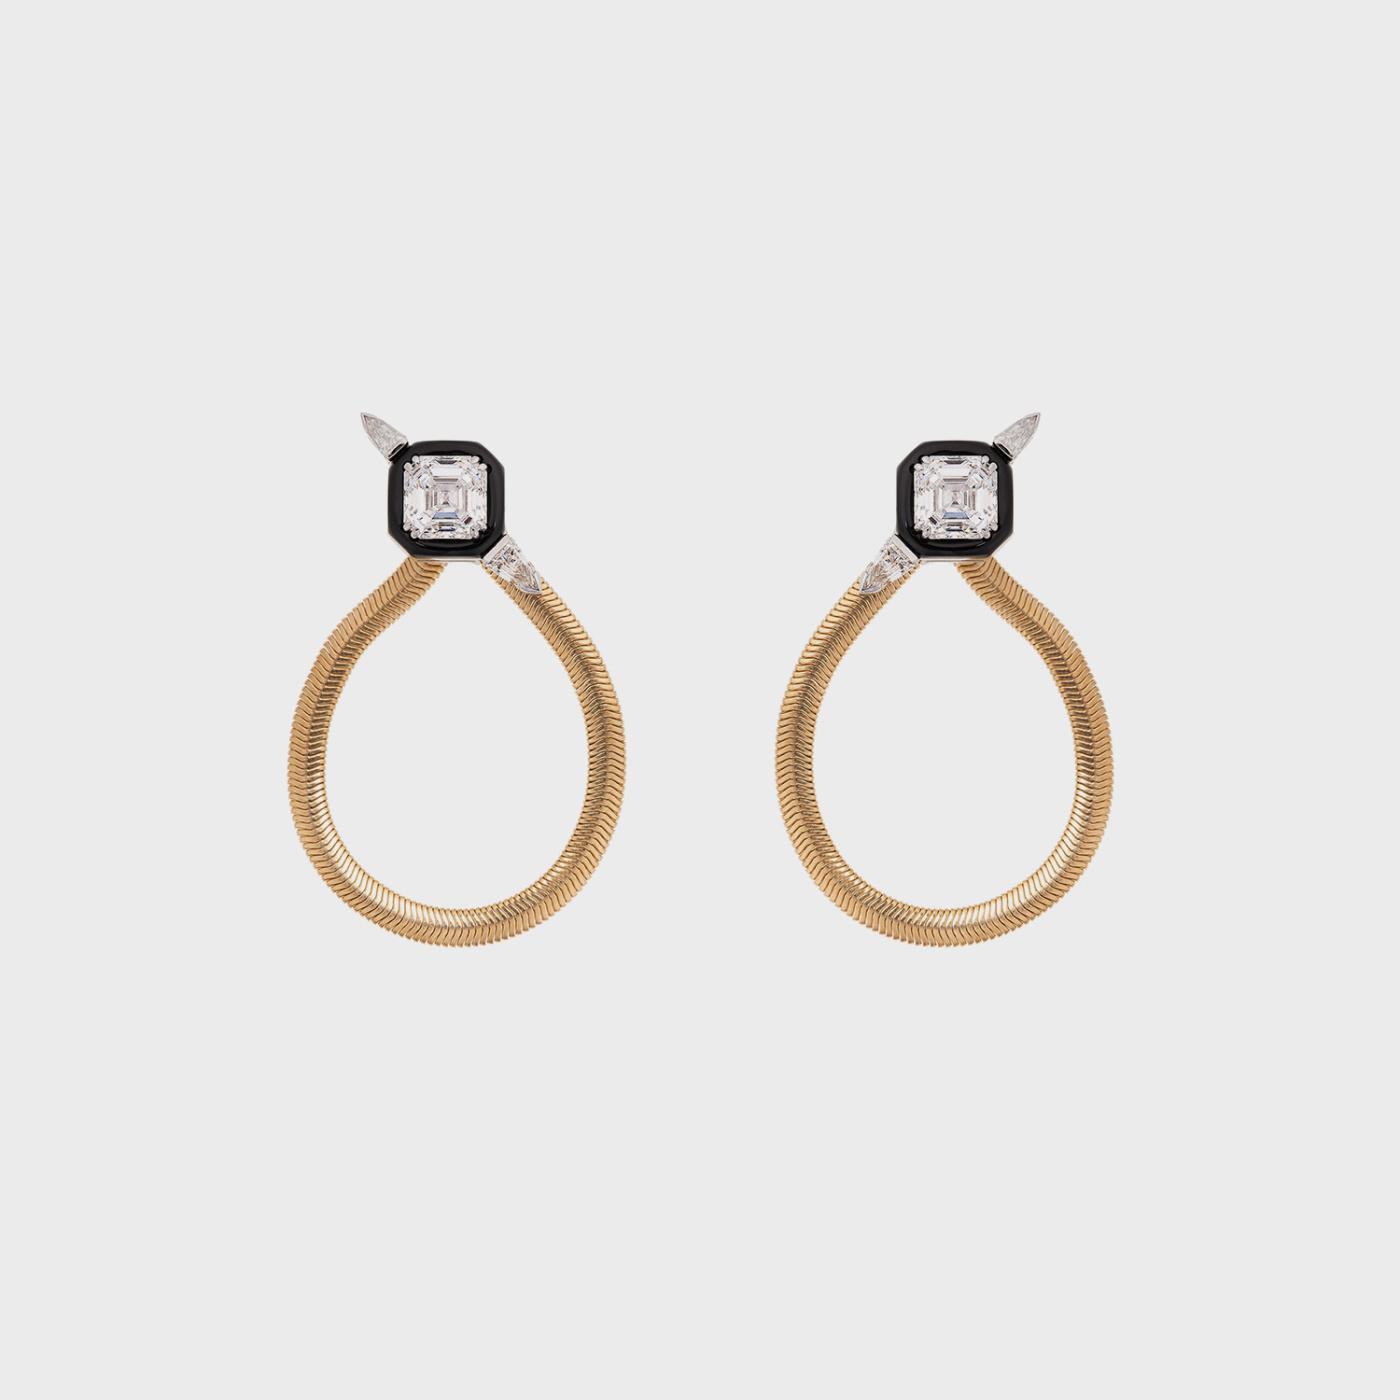 Yellow gold chain earrings with white diamonds and black enamel